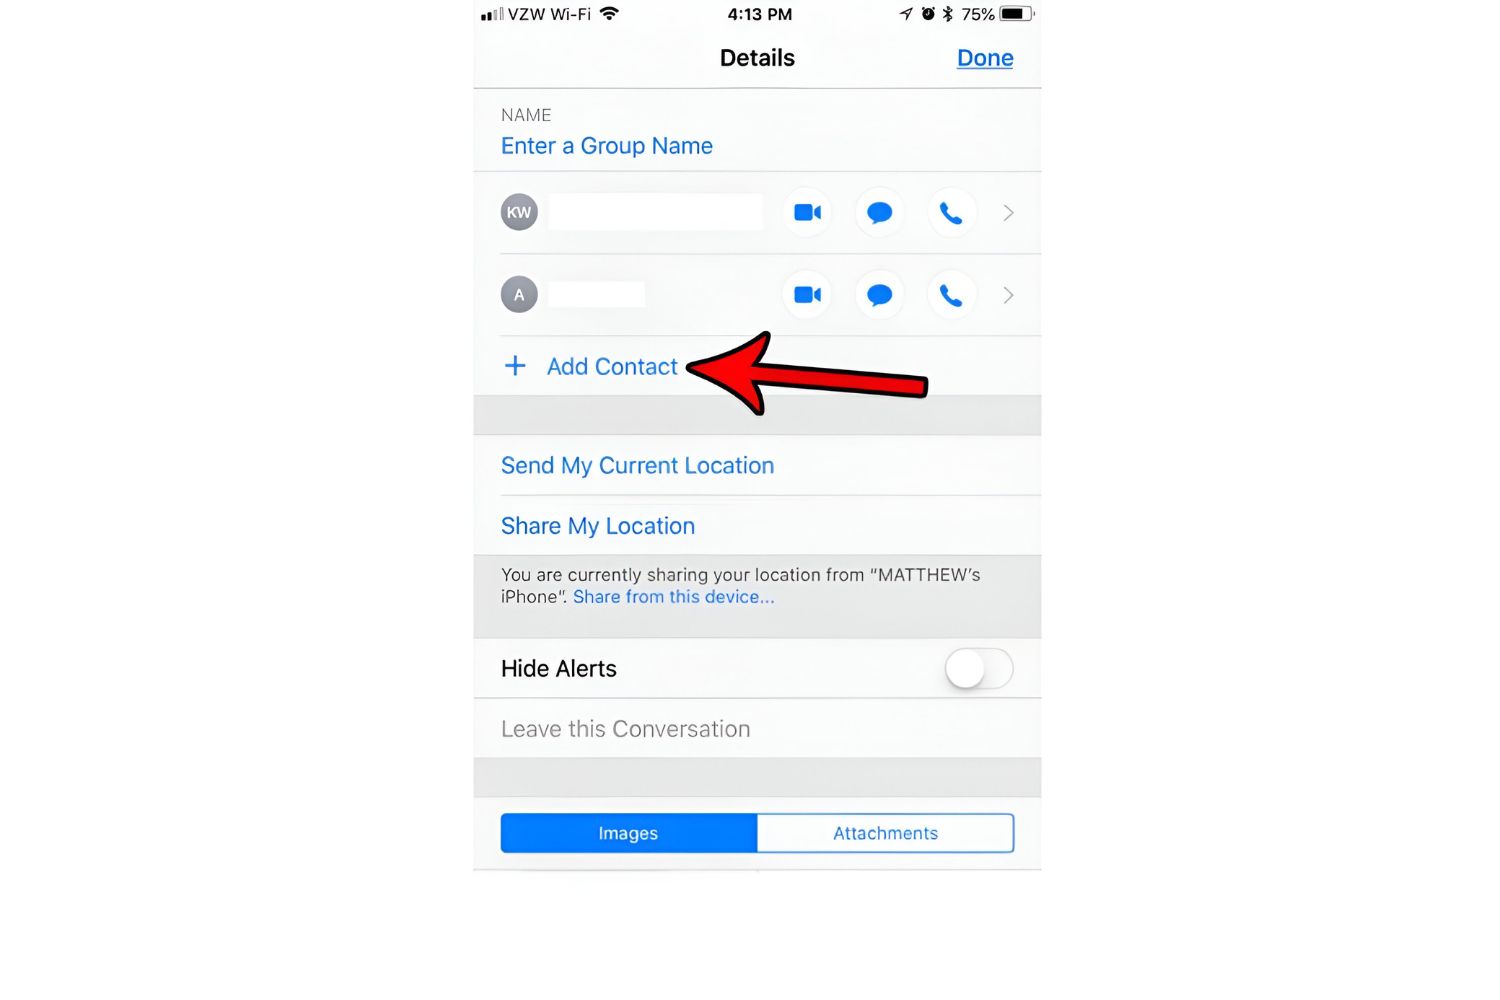 How To Add Contact On IMessage